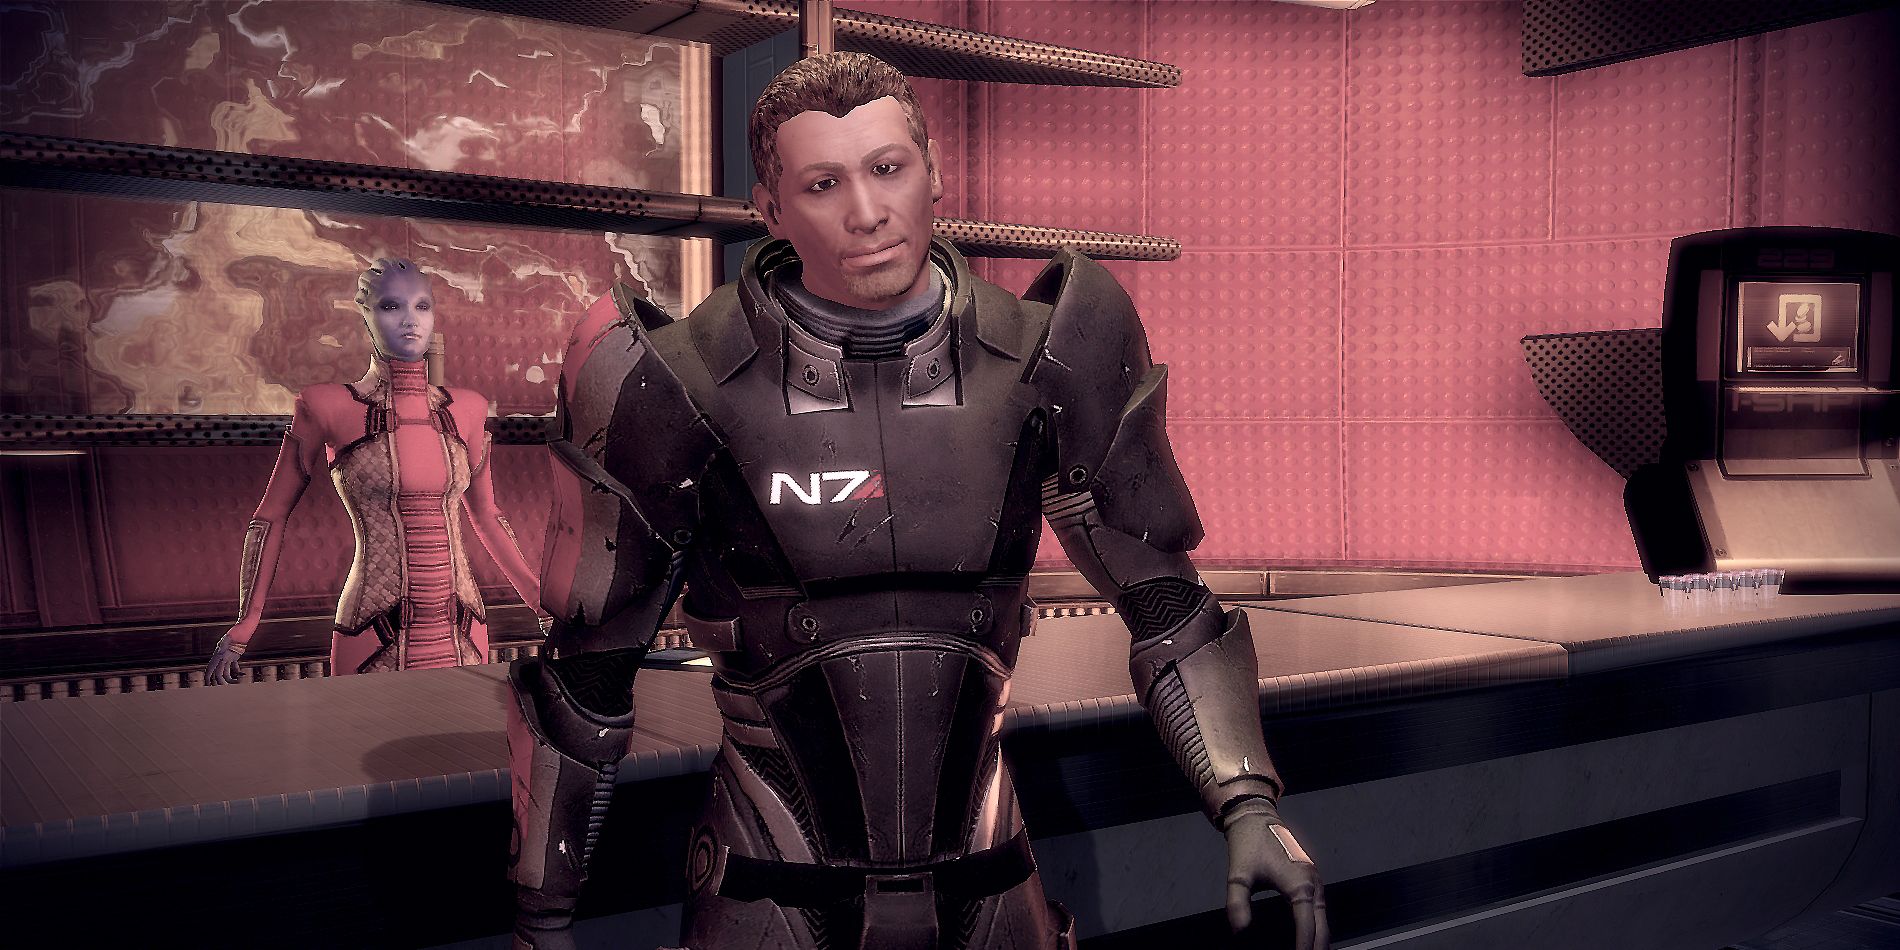 Conrad Verner pretends to by Alliance N7 rank in Mass Effect